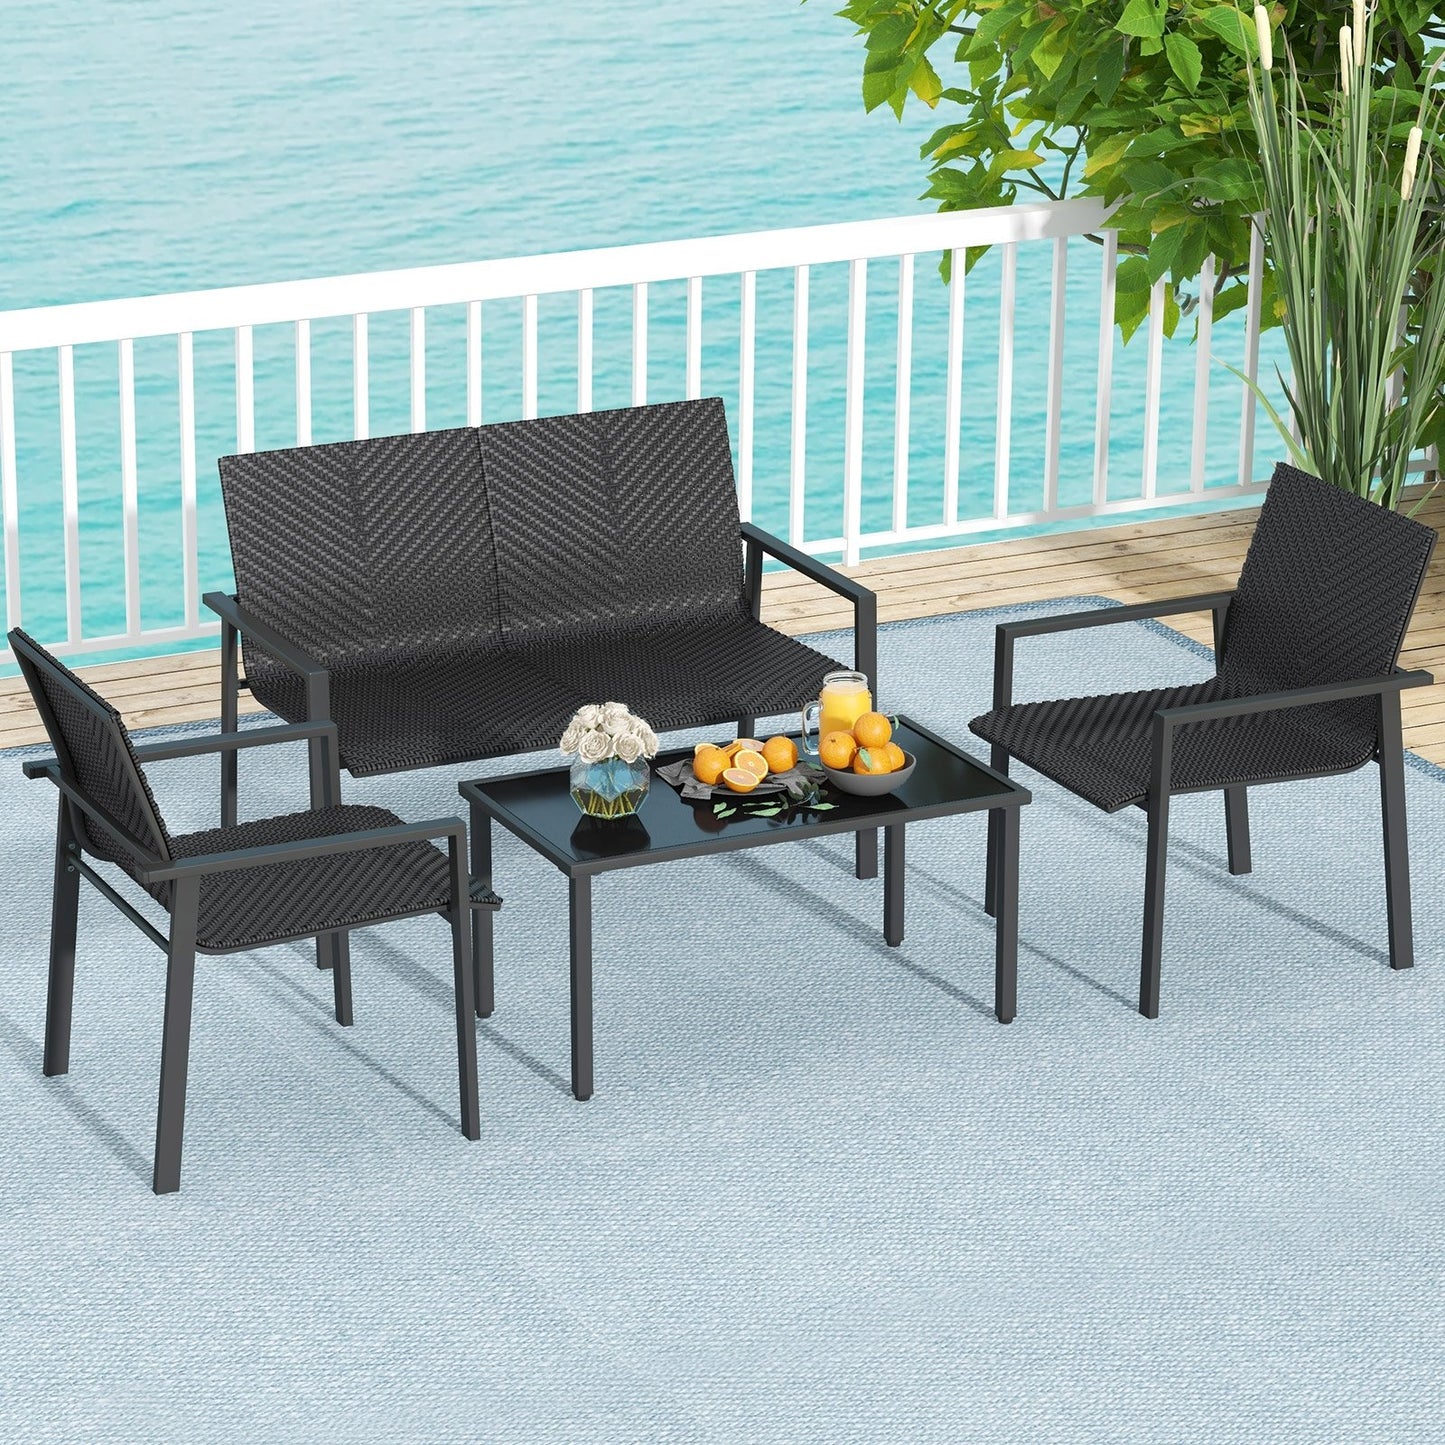 4 Pieces Patio Furniture Set with Heavy Duty Galvanized Metal Frame, Black